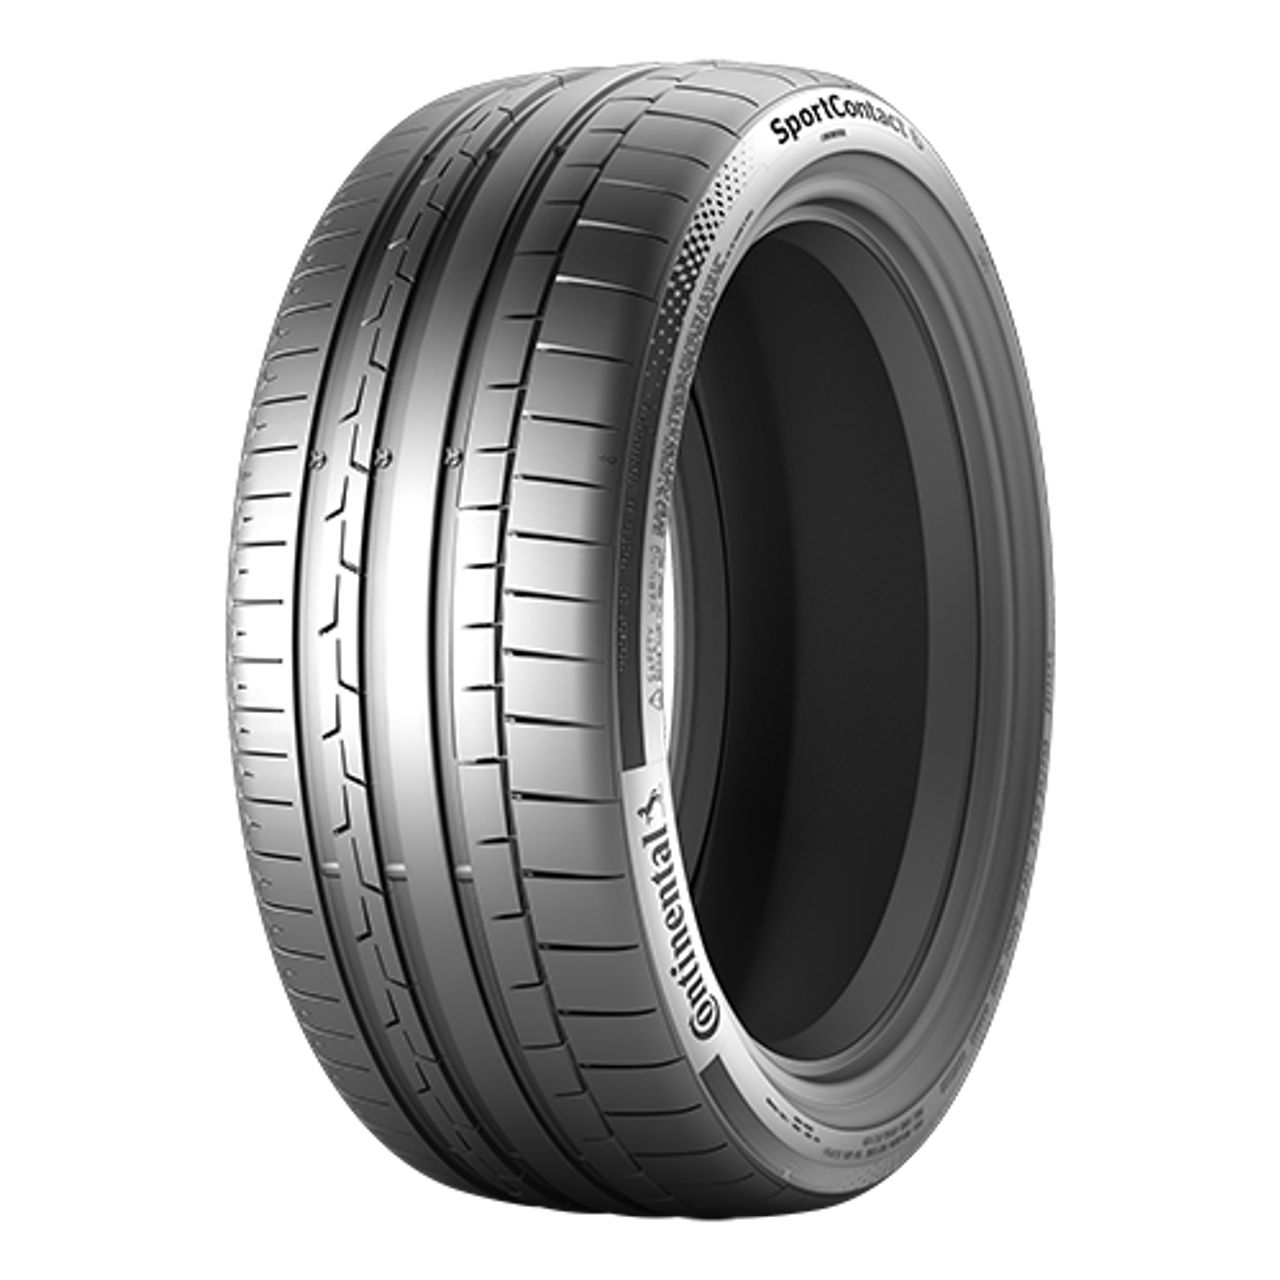 CONTINENTAL SPORTCONTACT 6 (AO) (EVc) 275/30ZR20 97(Y) CONTISILENT FR XL